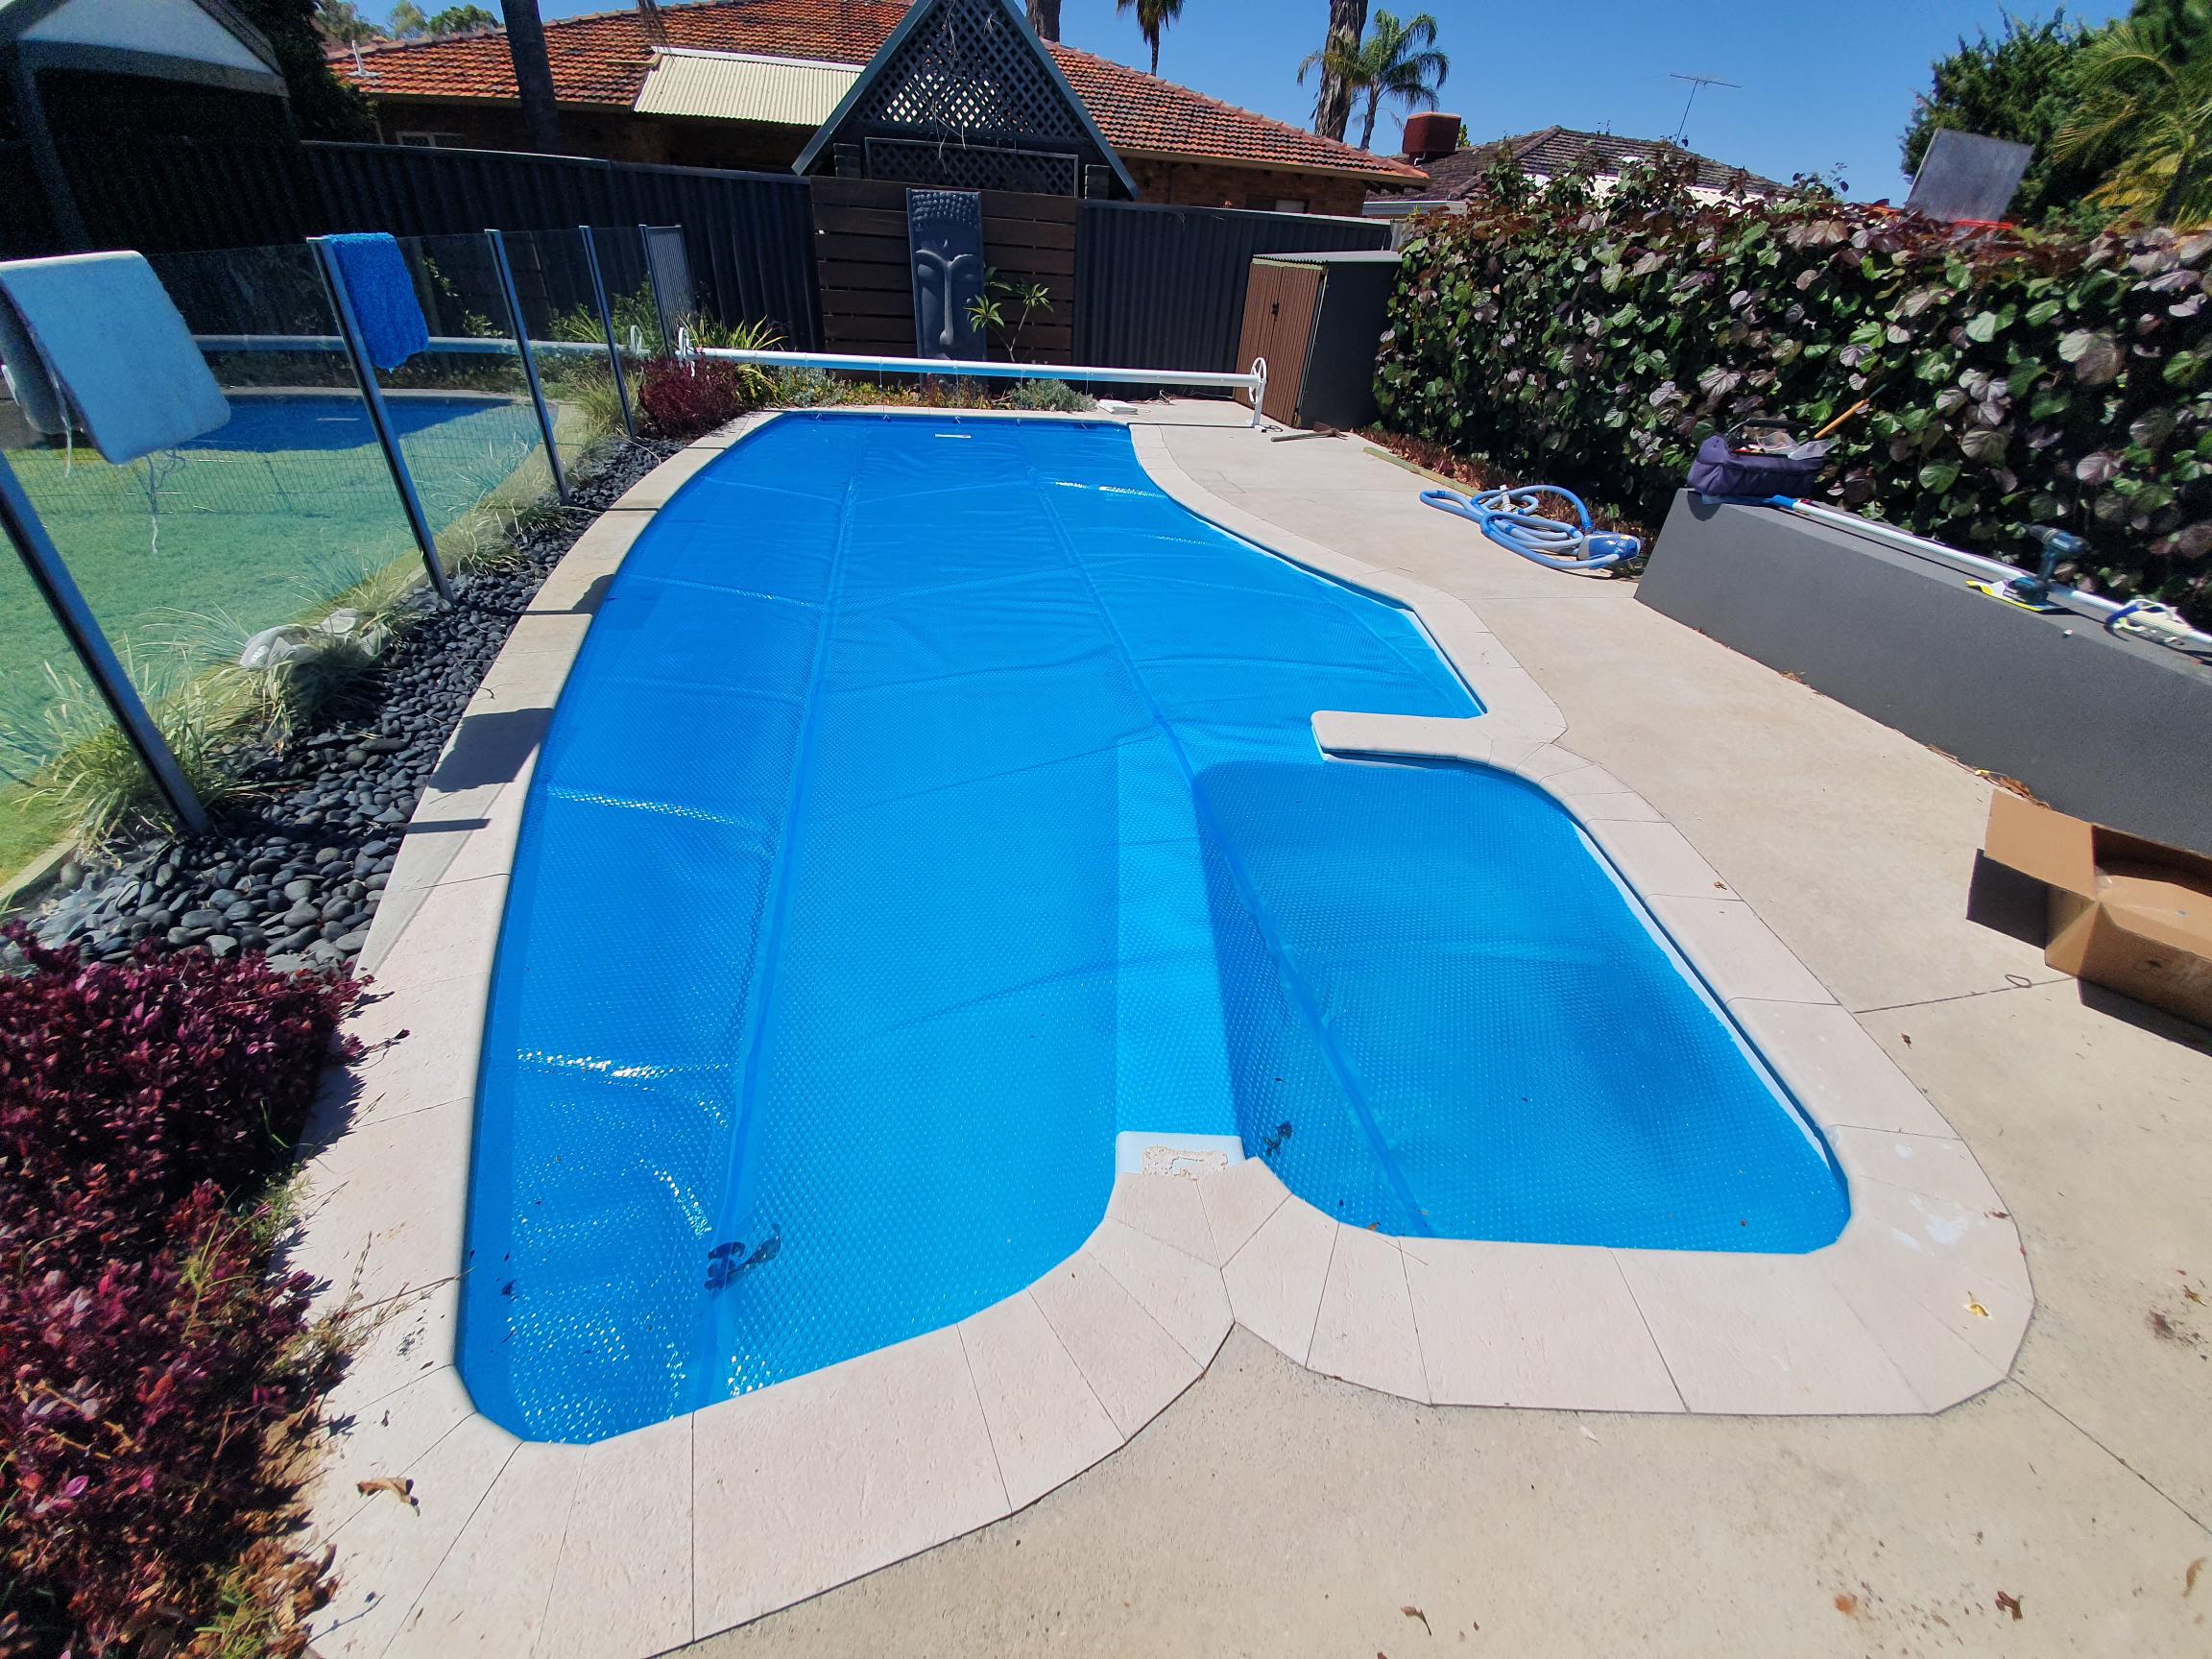 You can always have your pool and spa covered by the same cover!